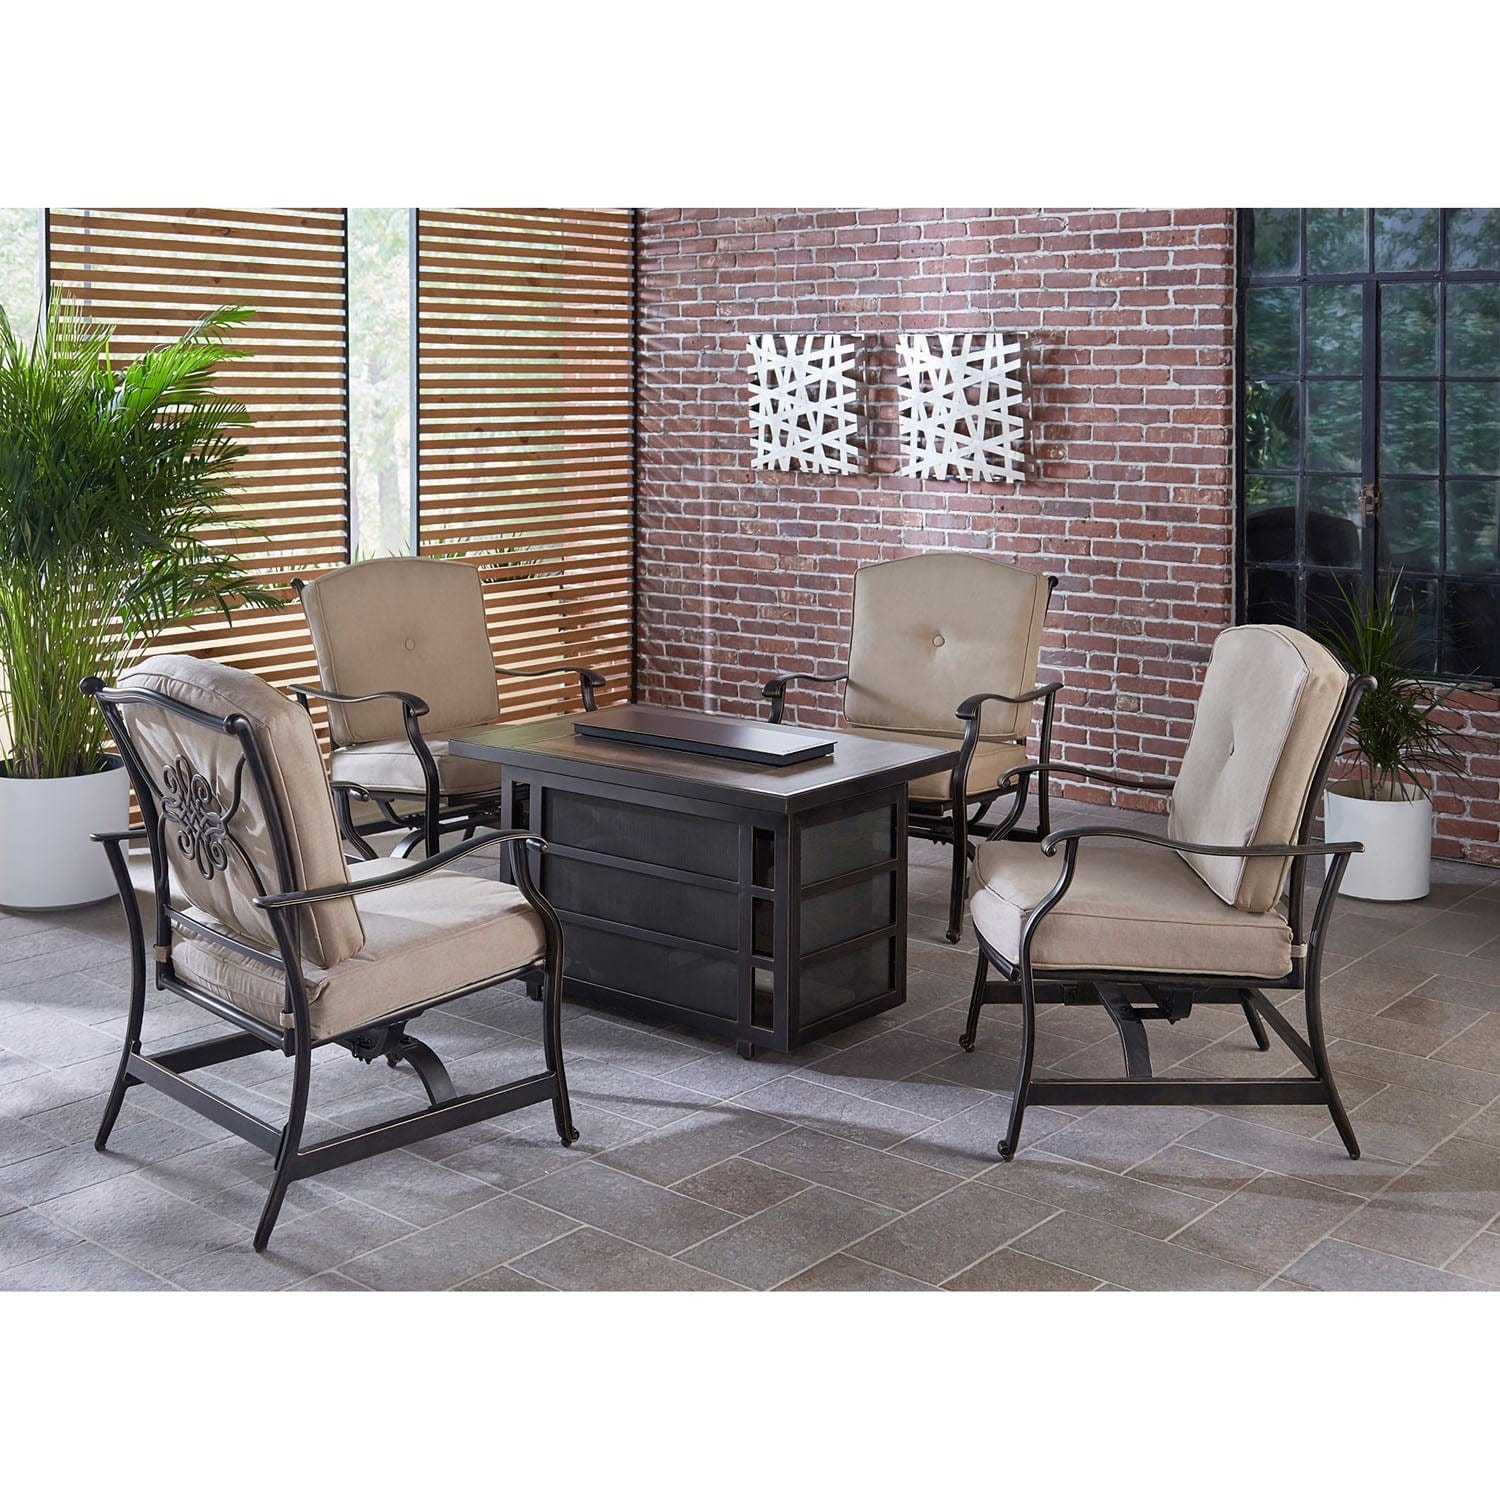 Hanover Fire Pit Chat Set Hanover - Traditions 5-Piece Aluminum Frame Seating Set in Tan with a 30,000 BTU Fire Pit Table | TRAD5PCRECFP-TAN